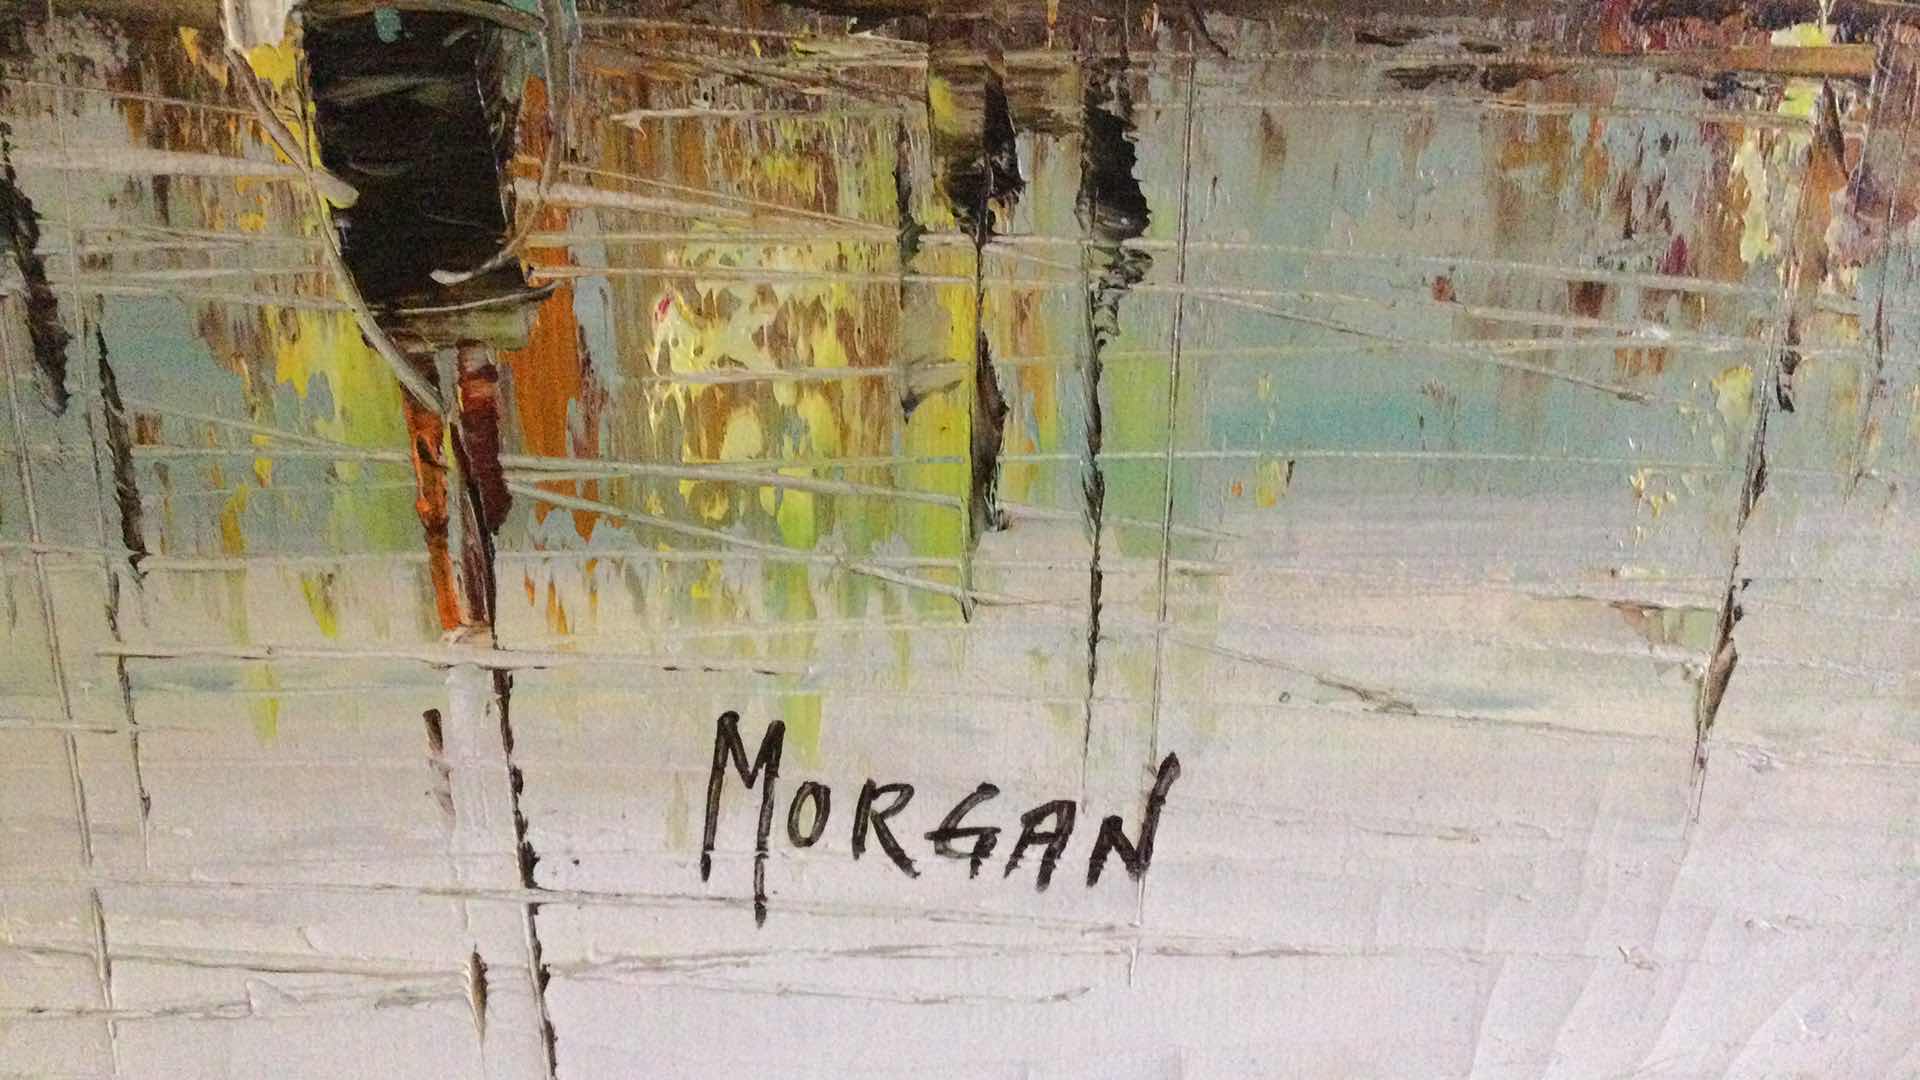 Photo 6 of FRAMED ARTIST SIGNED “MORGAN” PAINTING ON CANVAS 55” X 31”